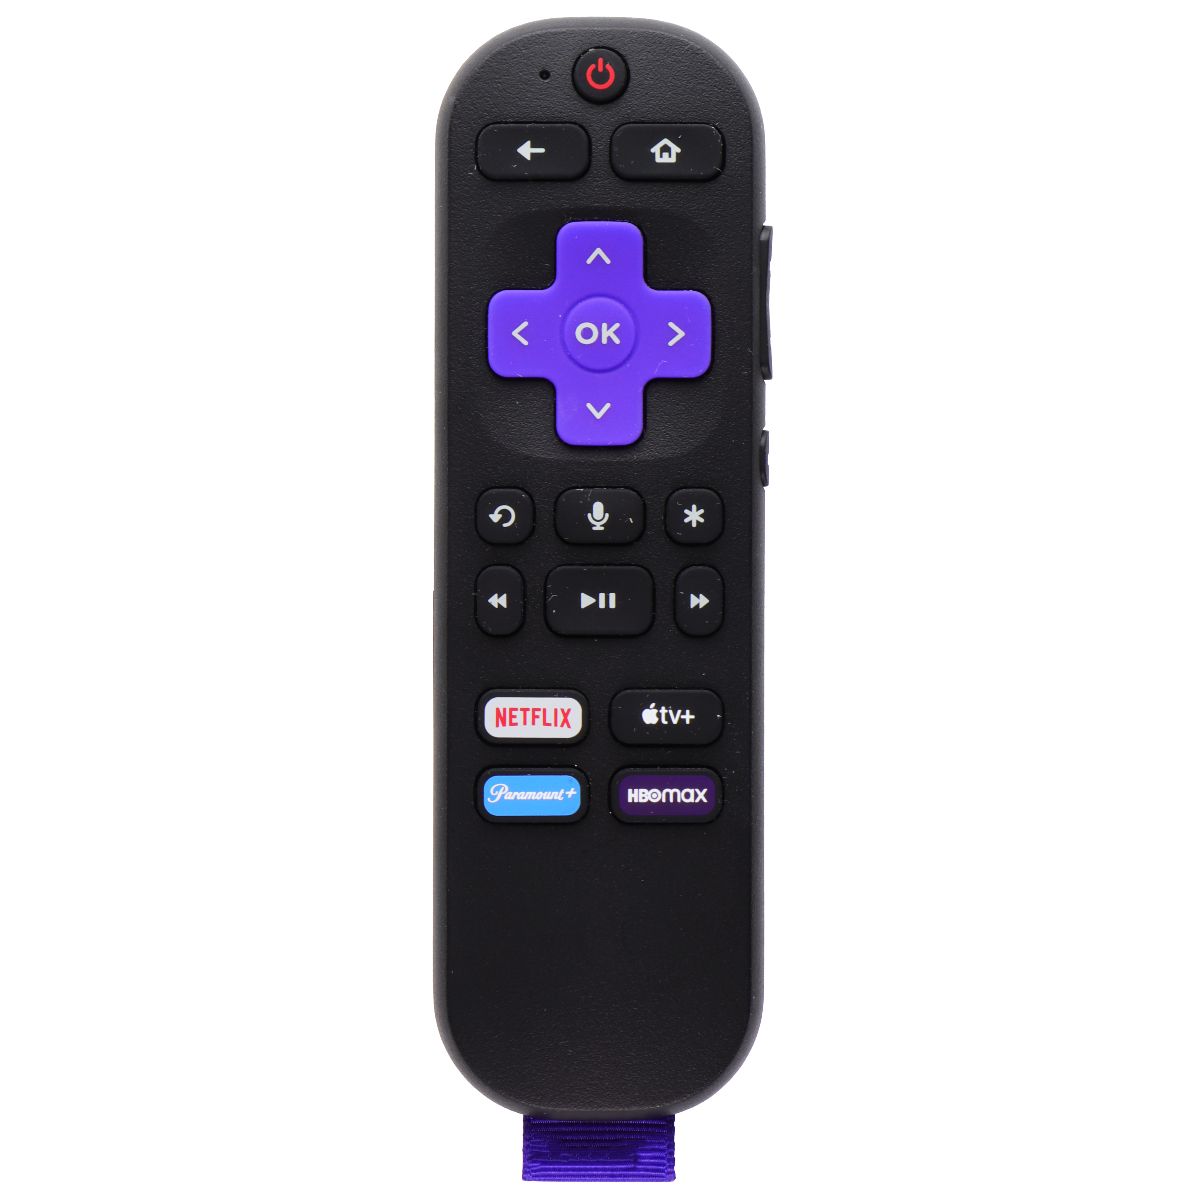 Replacement Remote Control (RC-GZ1) with Netflix/Paramount+/AppleTv+/HBOMax